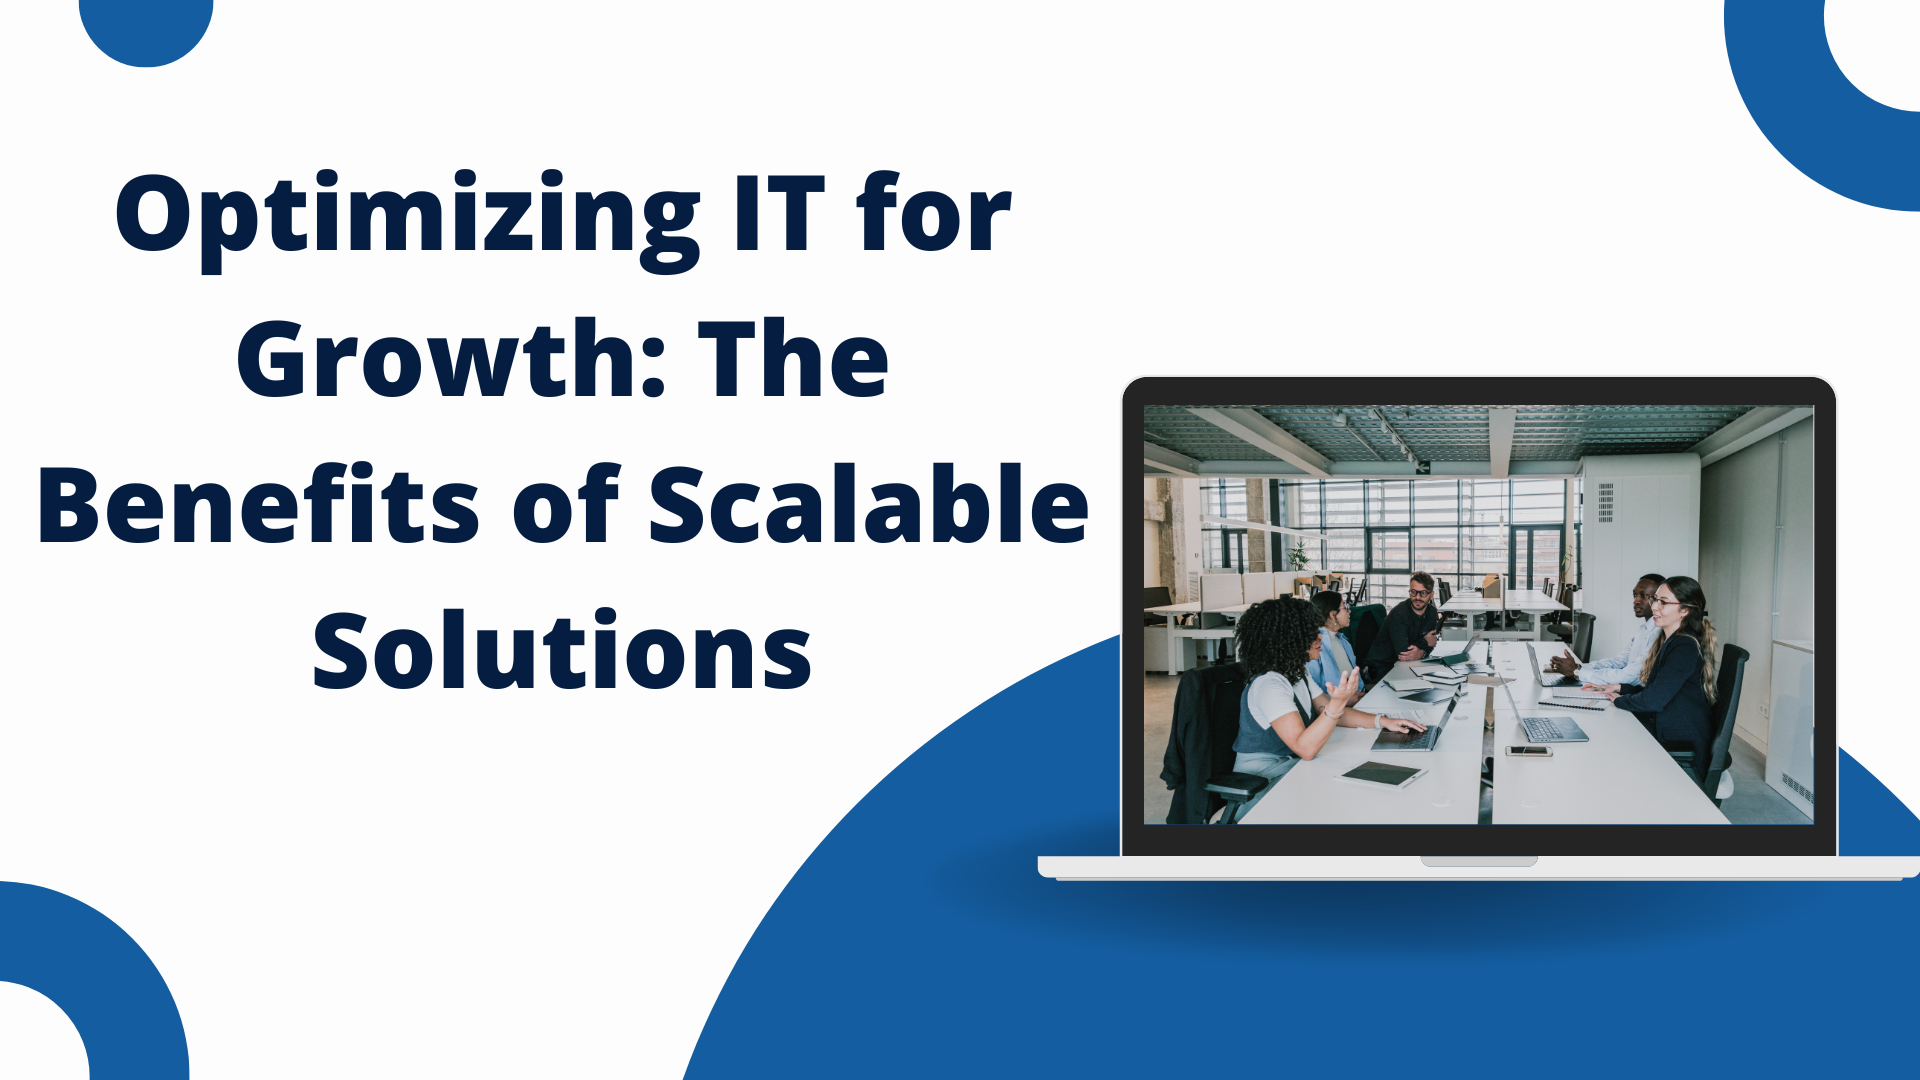 Optimizing IT for Growth: The Benefits of Scalable Solutions